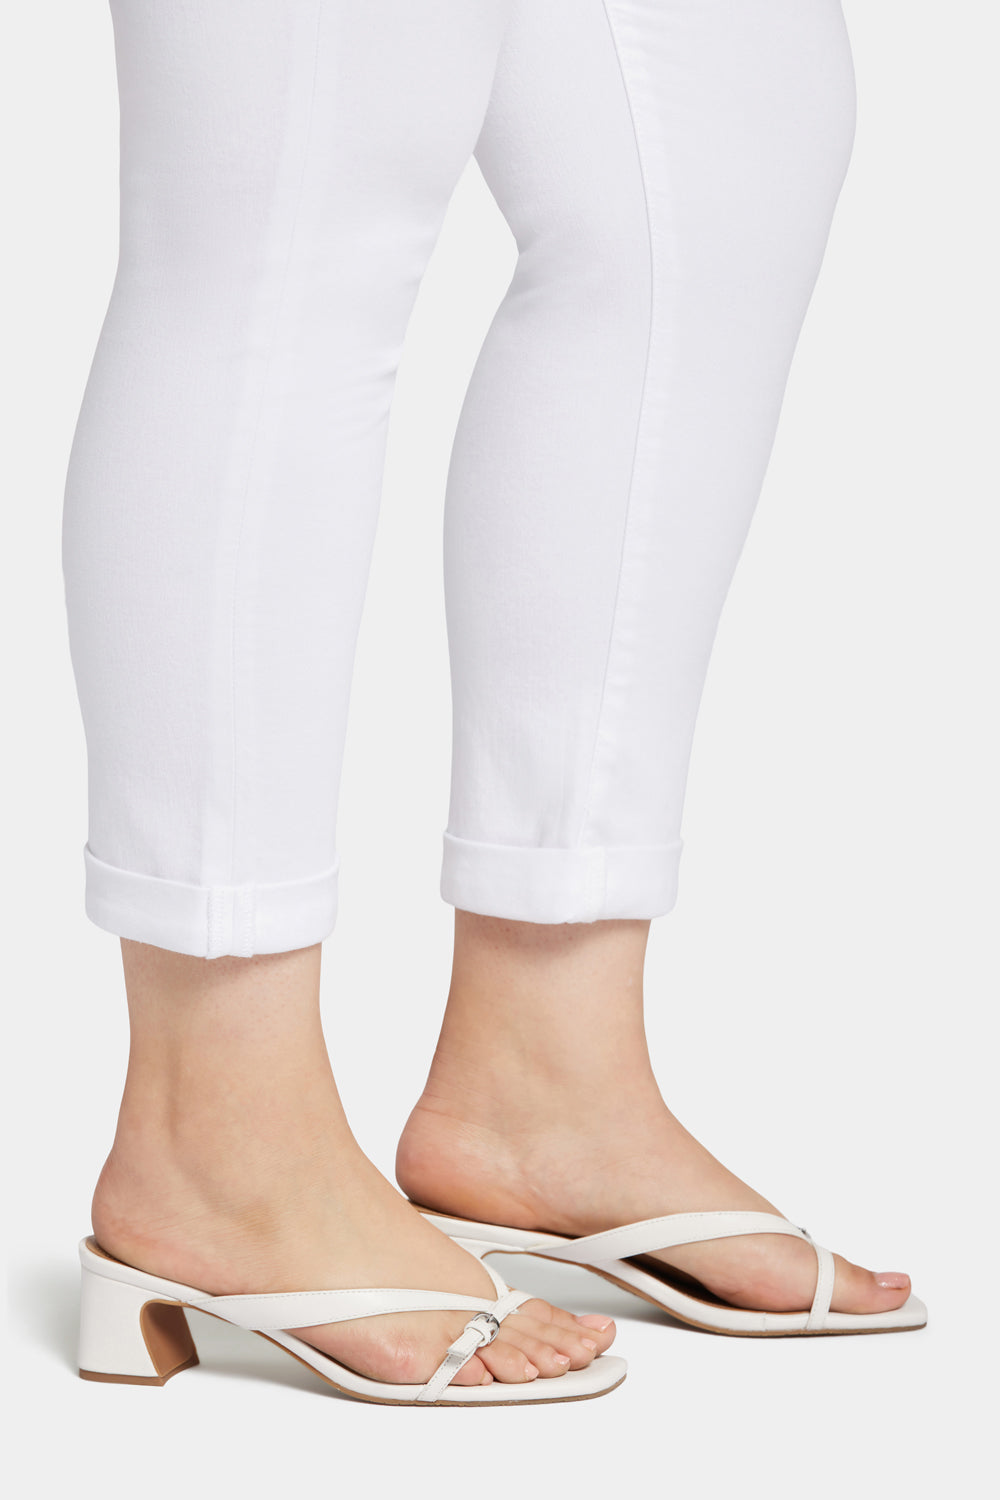 NYDJ Sheri Slim Ankle Jeans In Plus Size With Roll Cuffs - Optic White